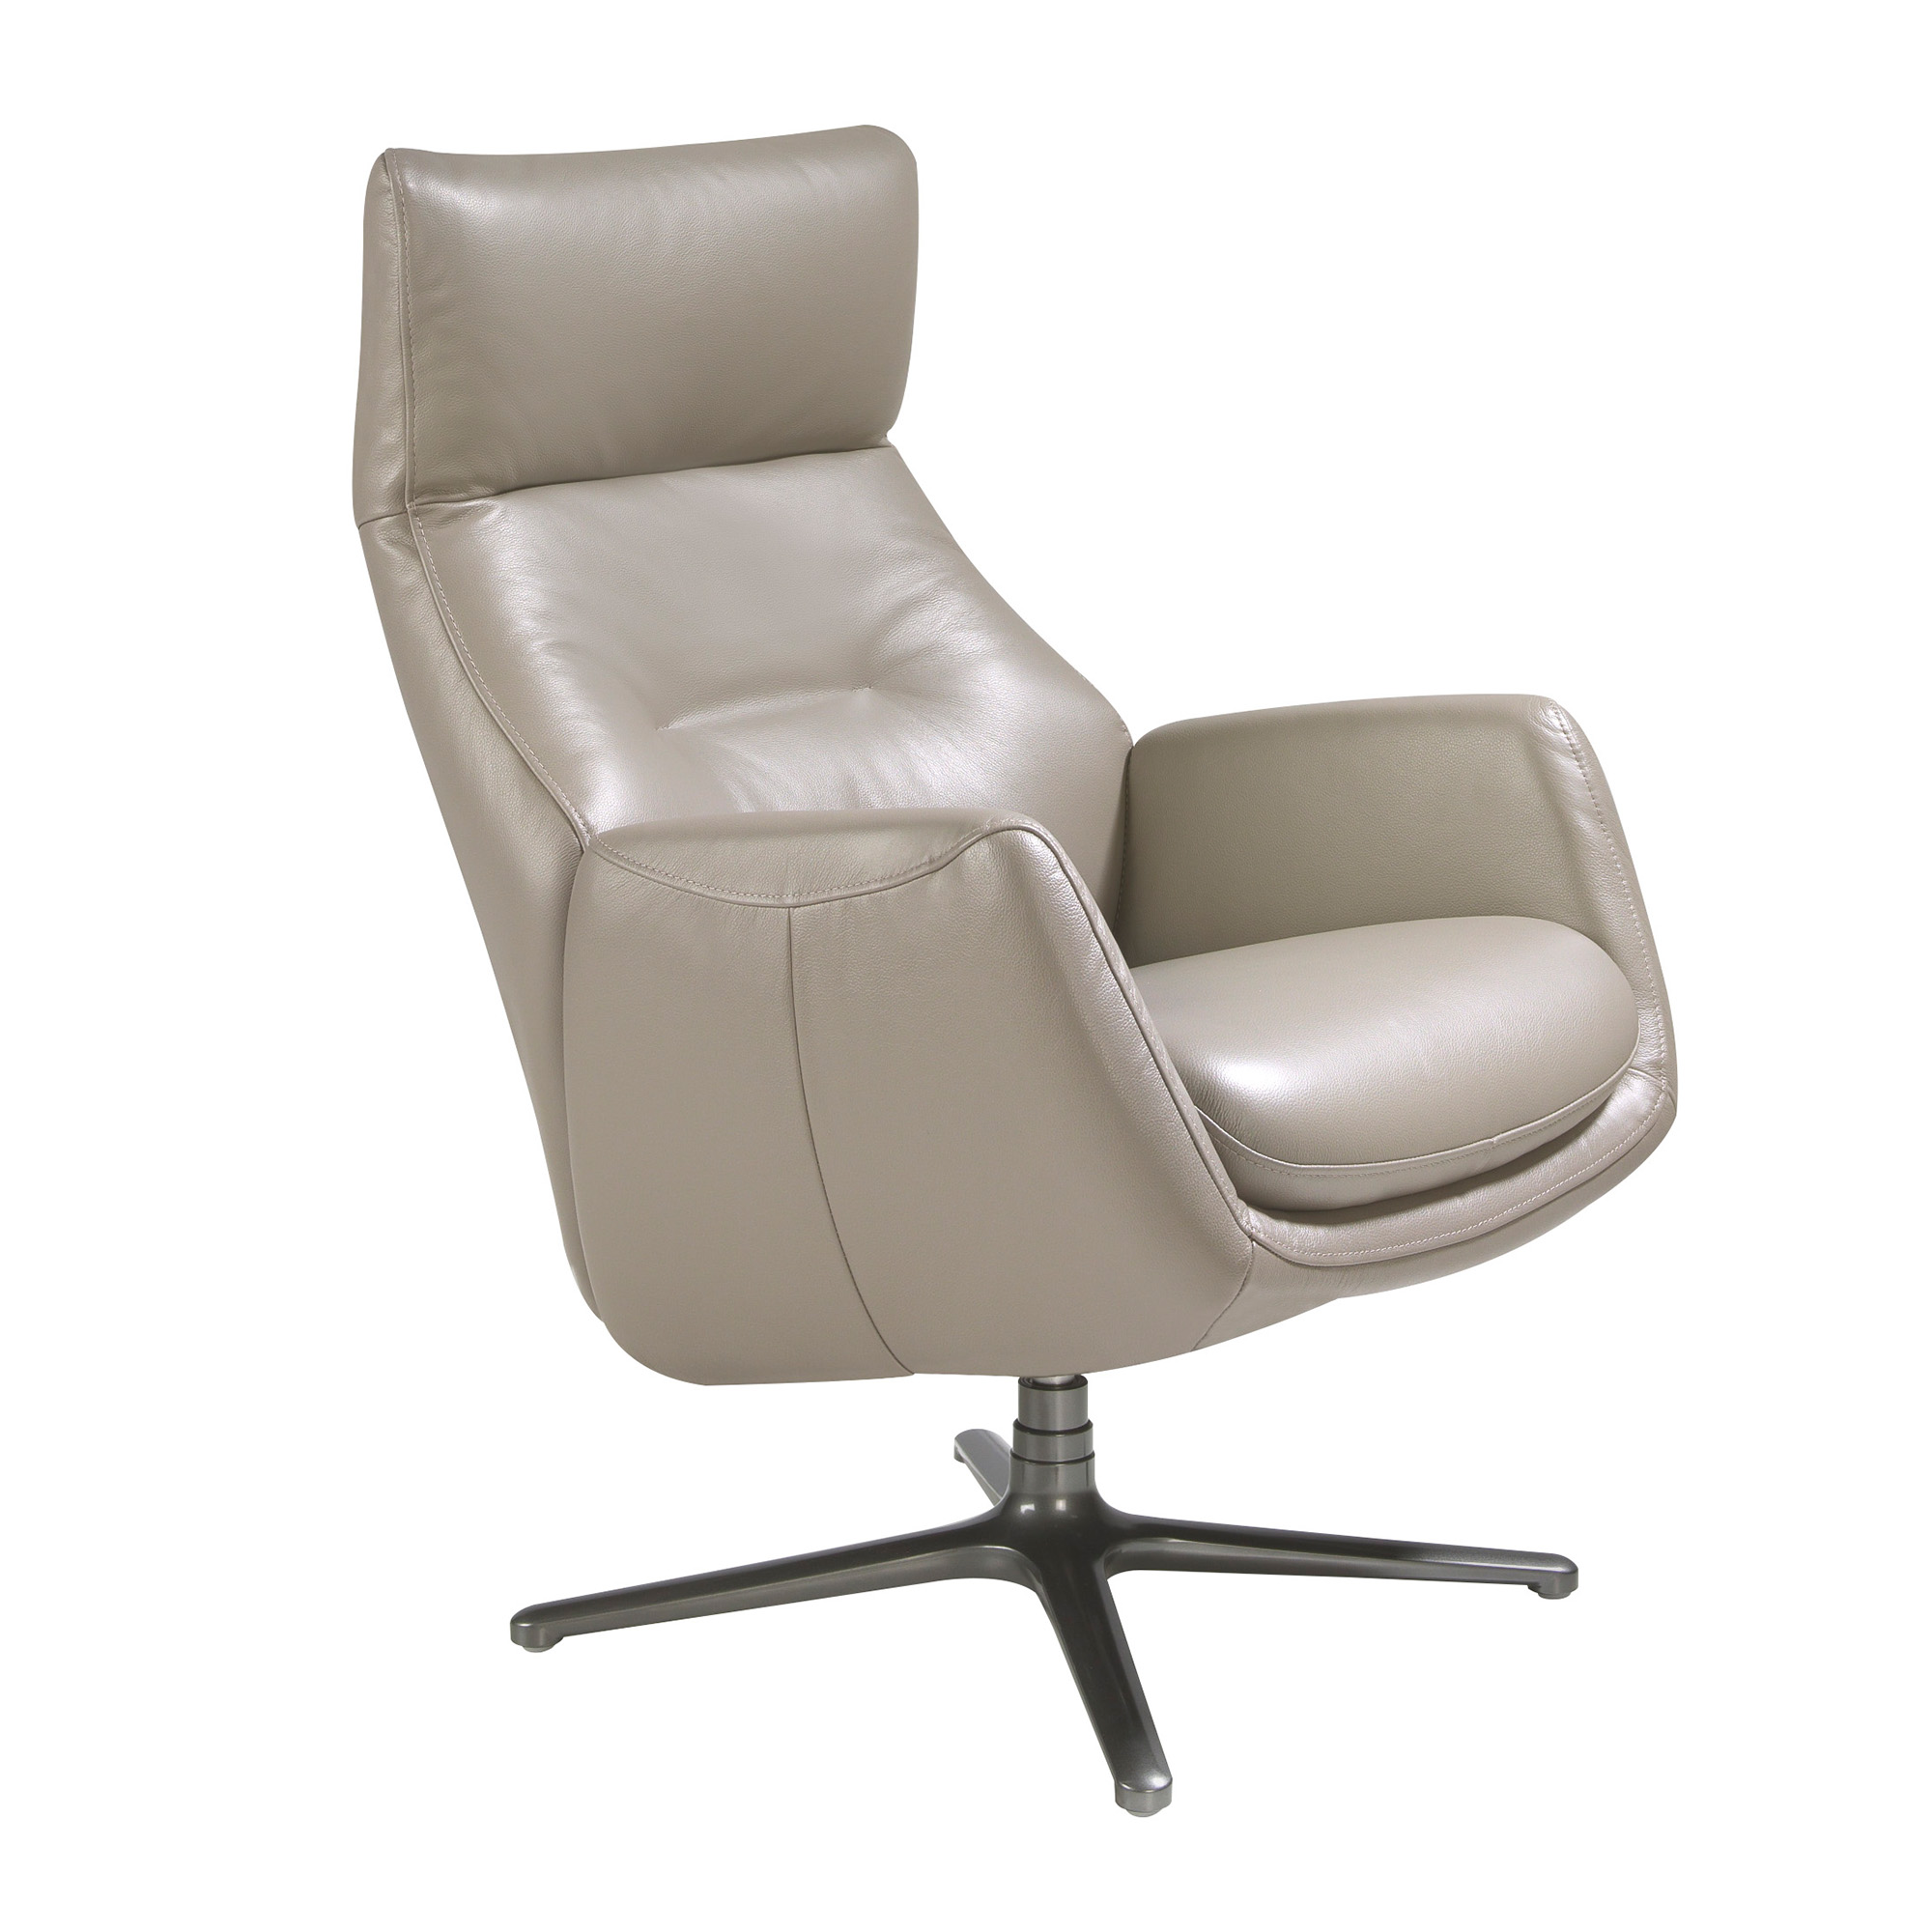 Leather upholstered reclining swivel armchair with darkened steel legs